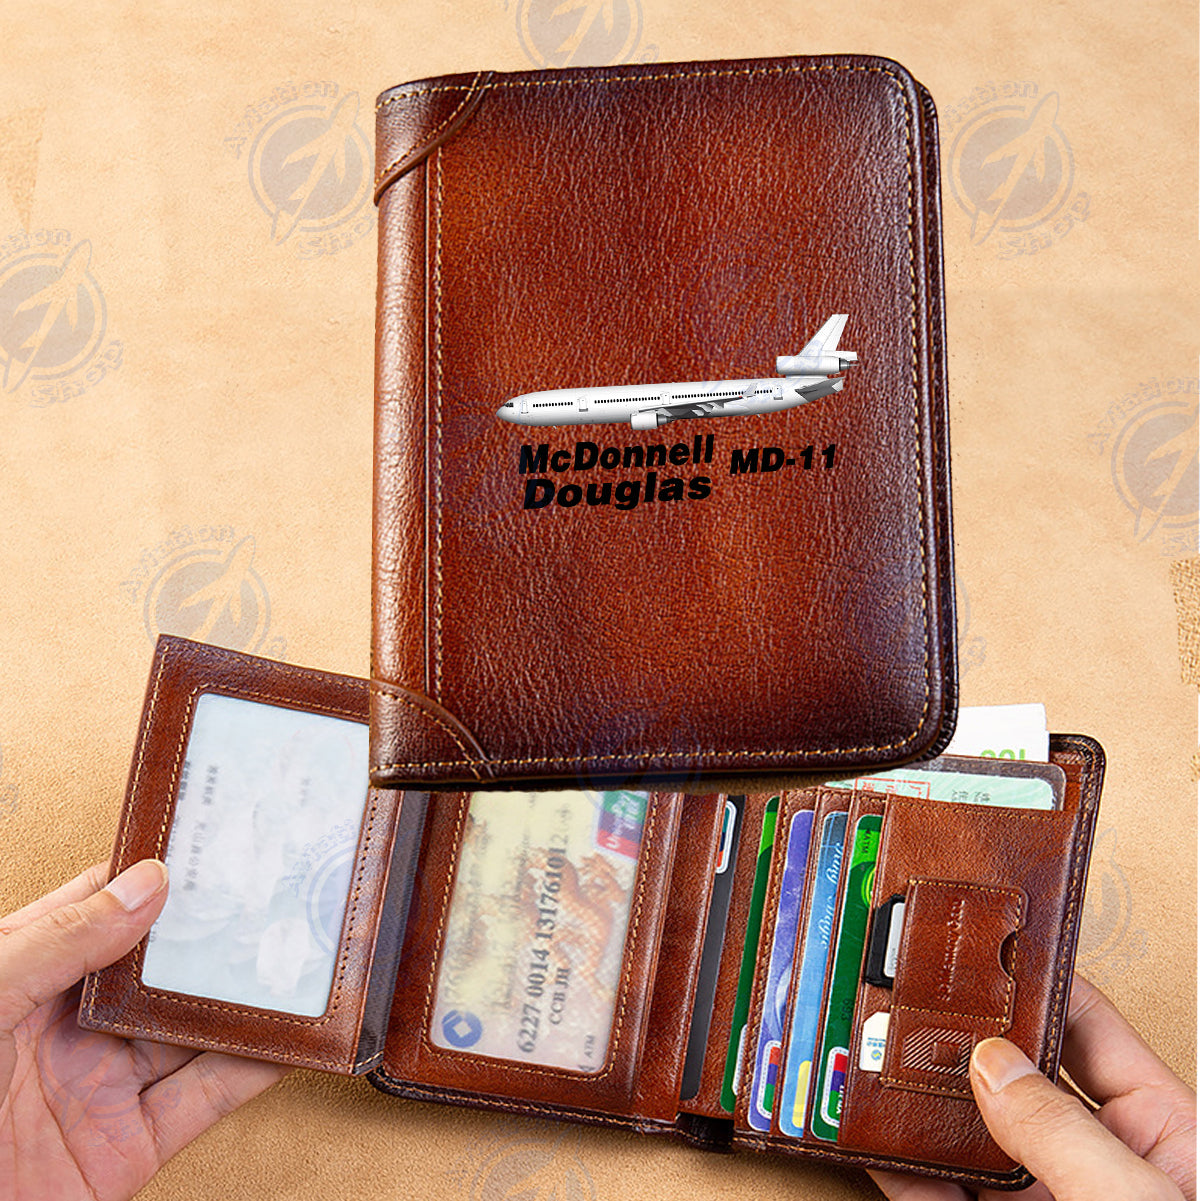 The McDonnell Douglas MD-11 Designed Leather Wallets